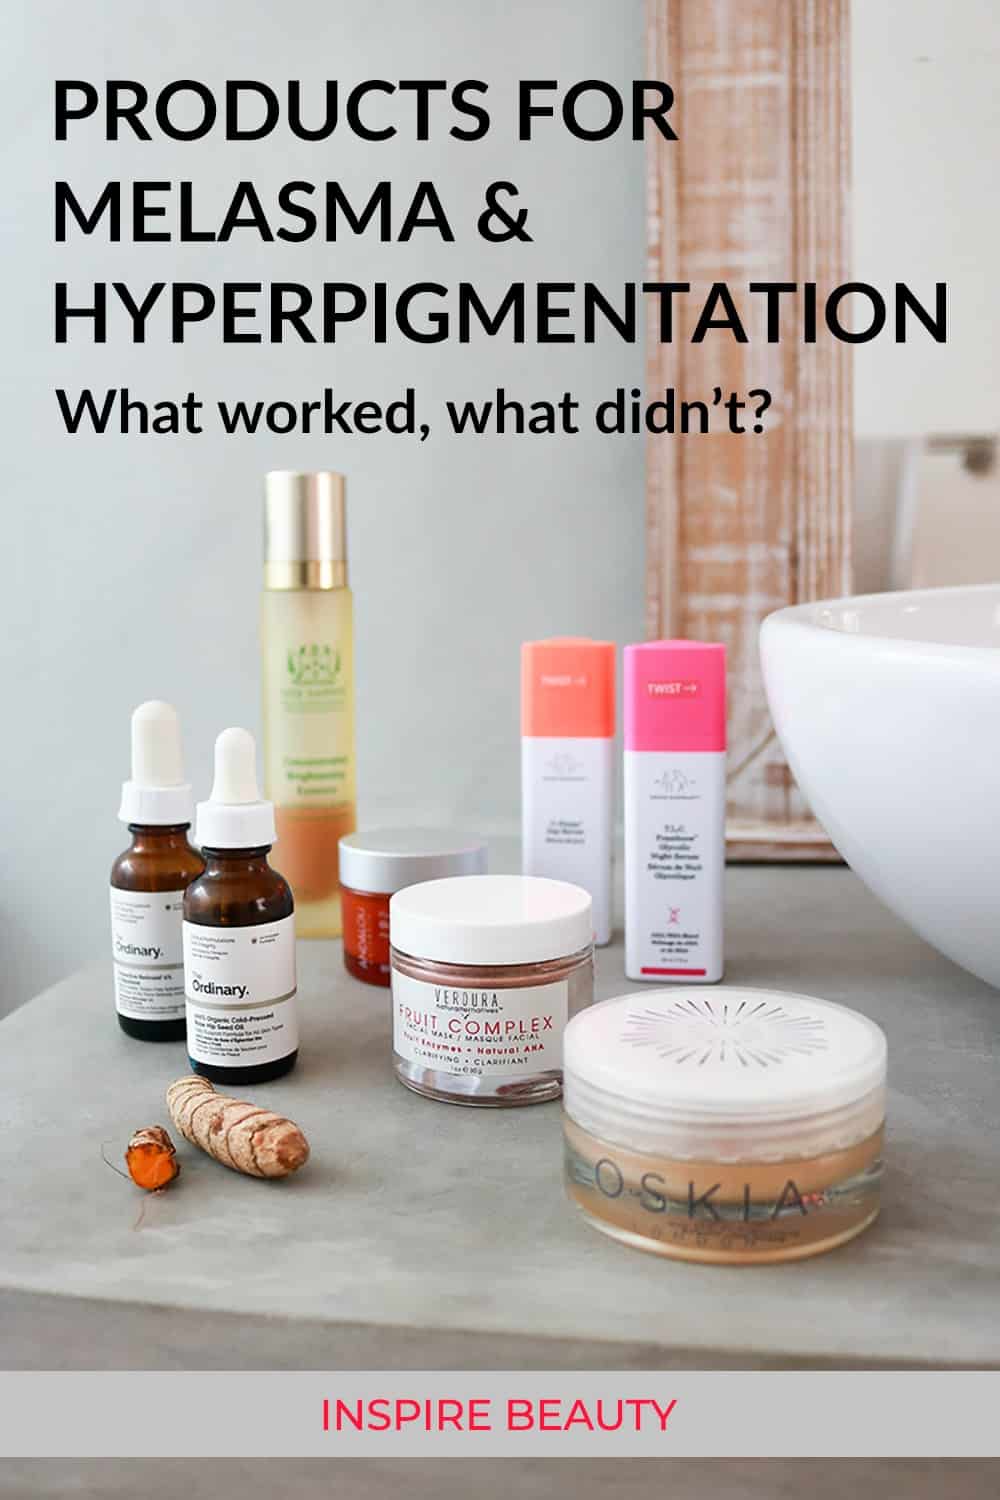 Review of products I used for hyperpigmentation from Drunk Elephant, Oskia, Tata Harper, Andalou Naturals, VERDURA naturalternatives, The Ordinary.